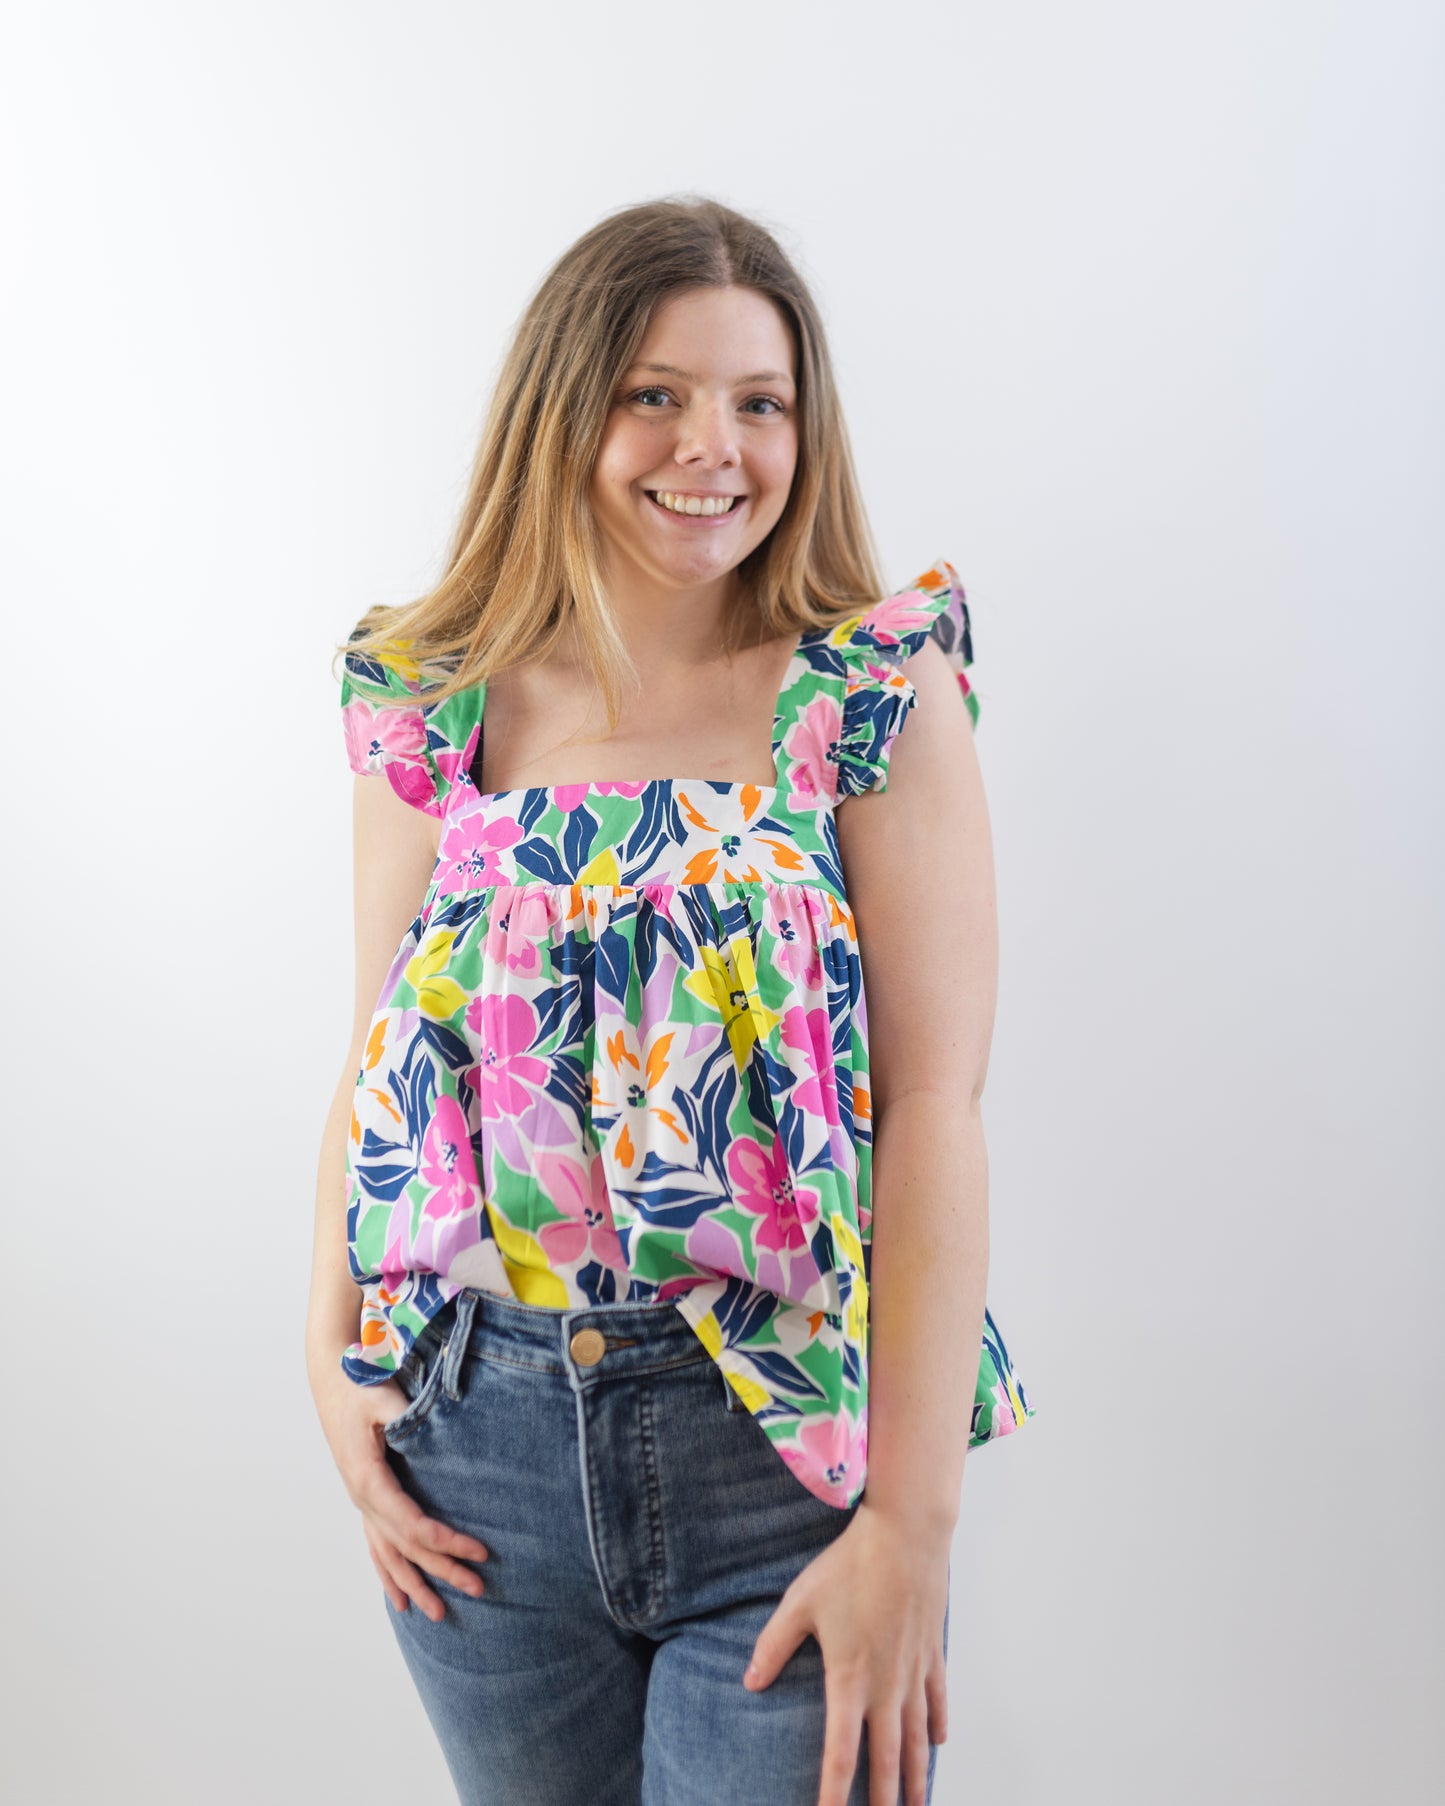 Hooked on You Floral Top